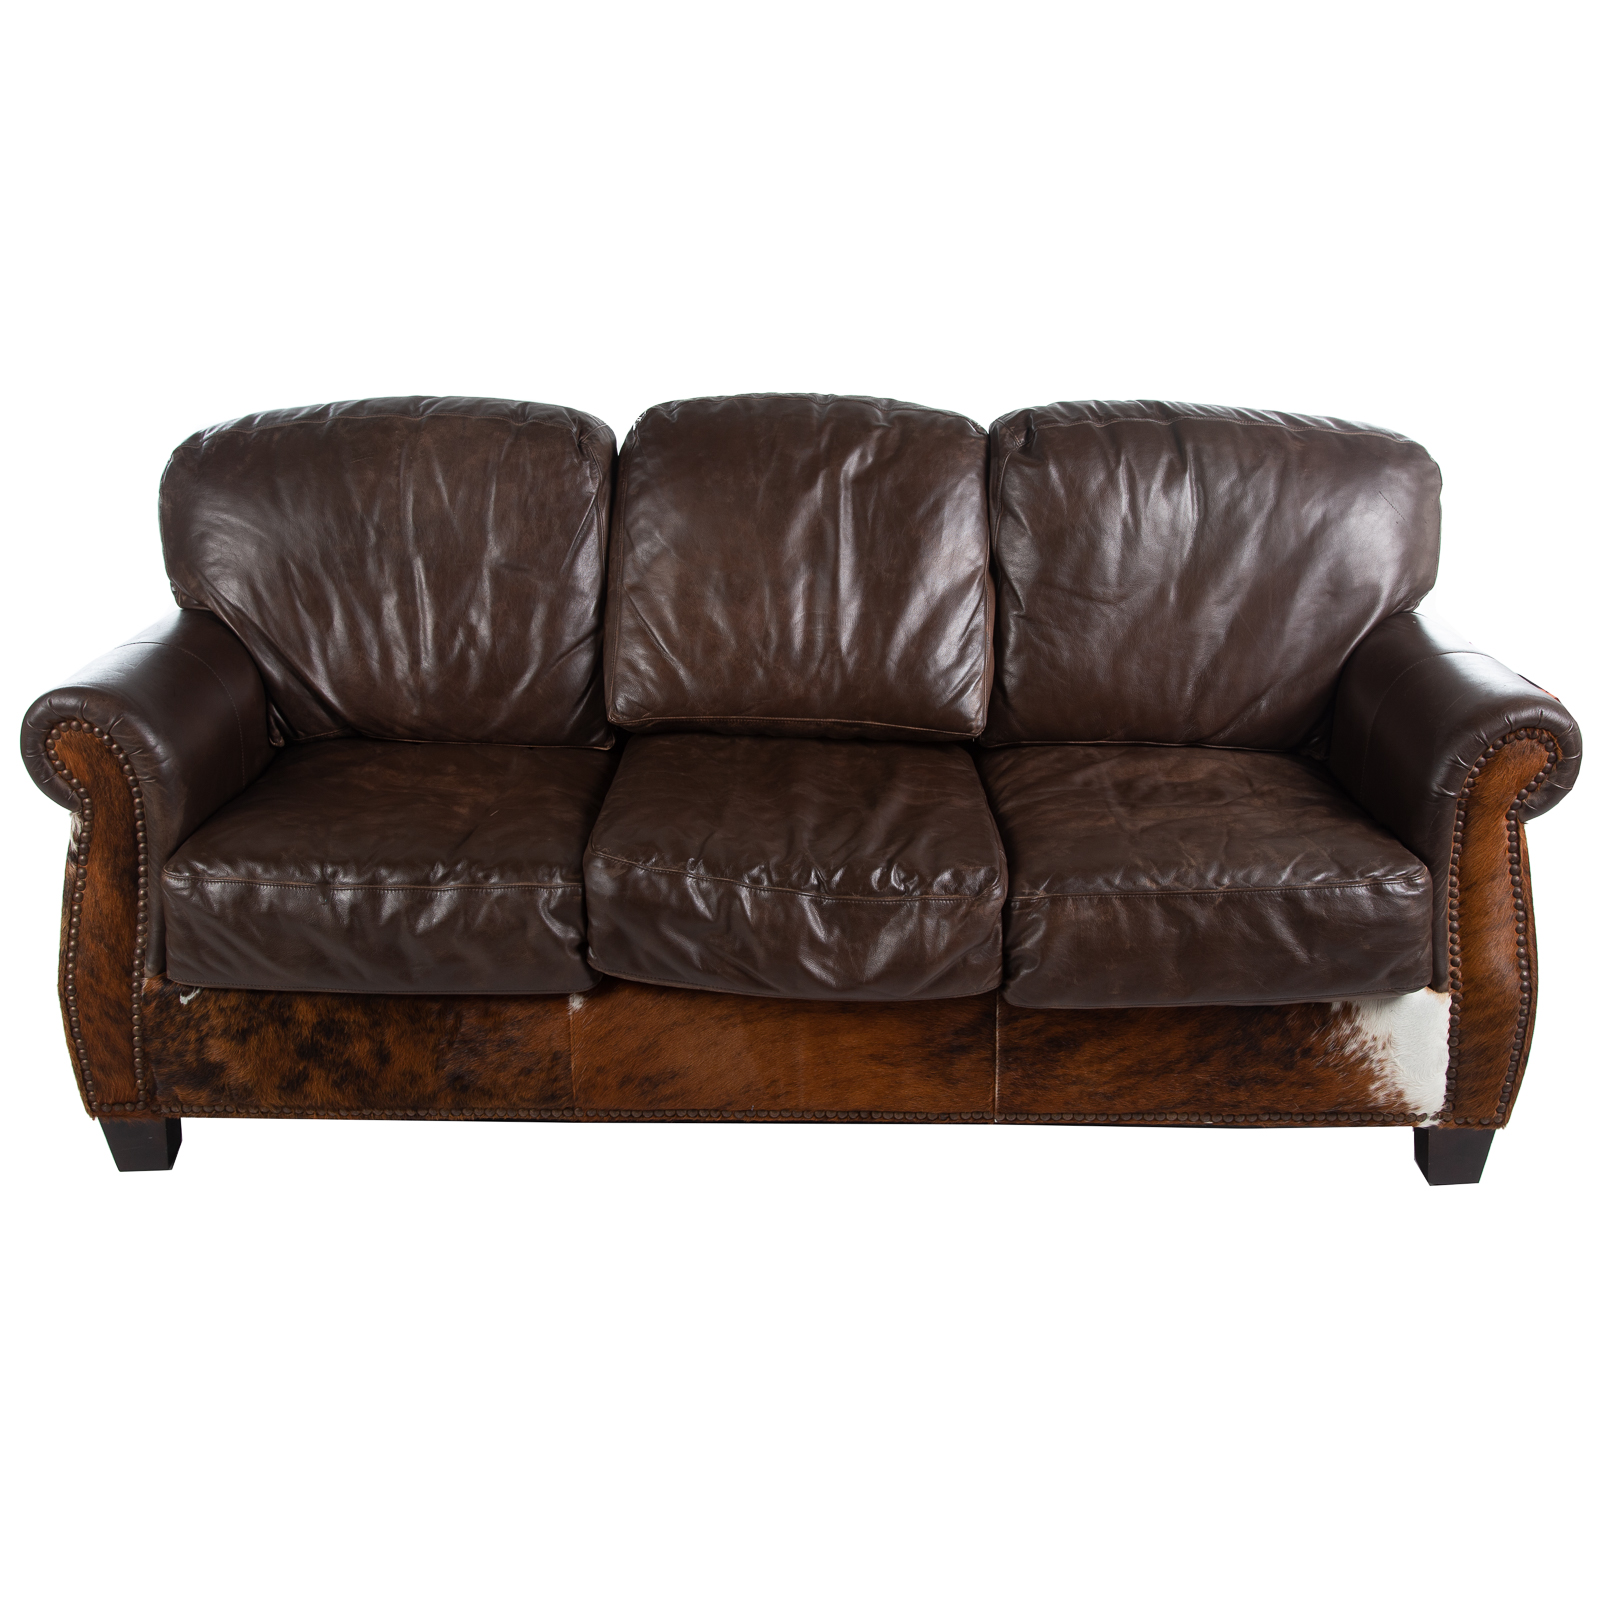 COWHIDE & LEATHER UPHOLSTERED SOFA 20th